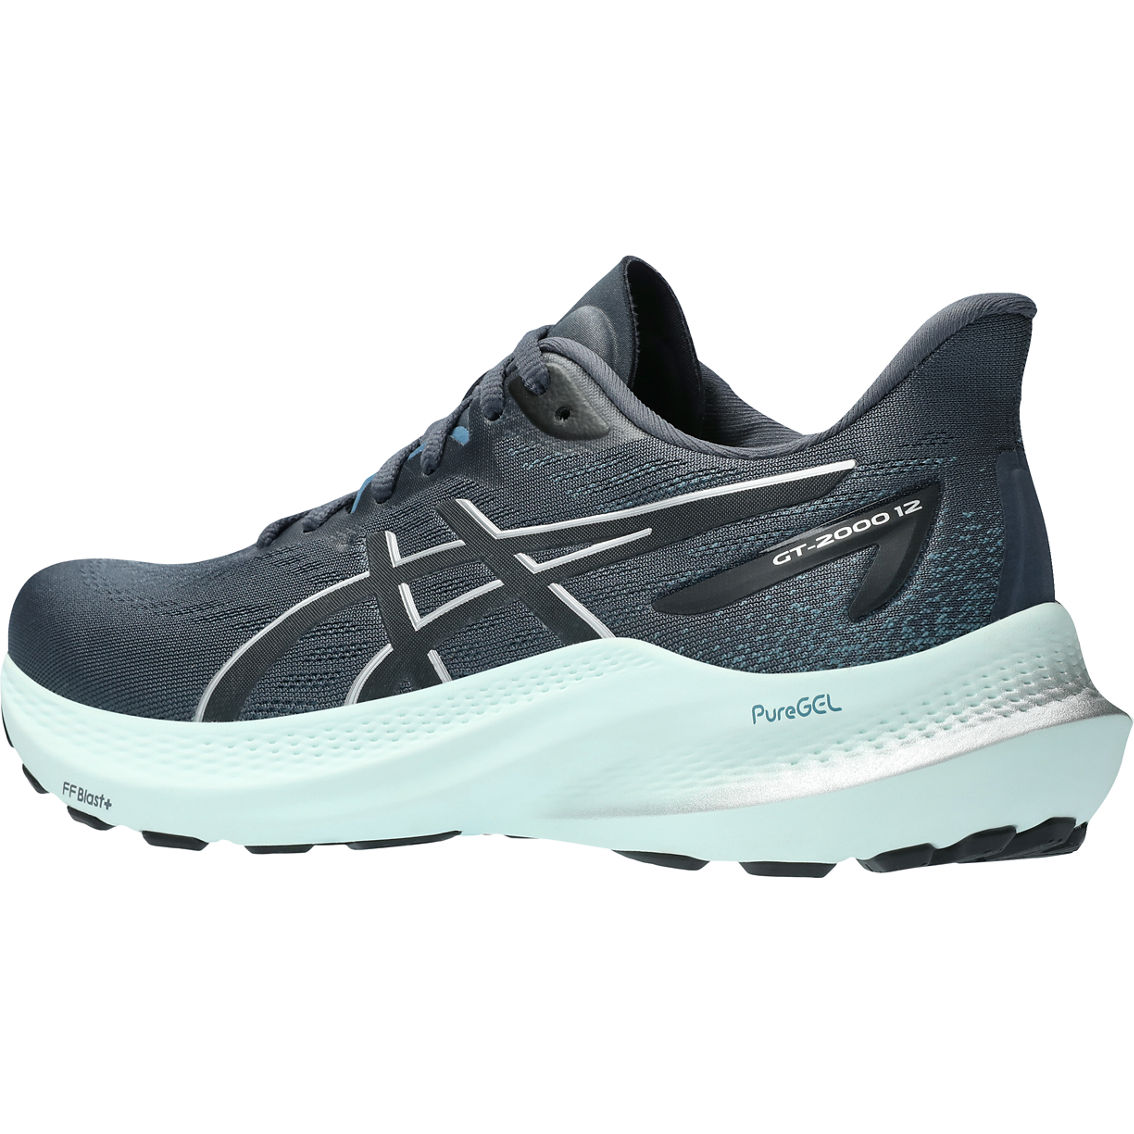 ASICS Women's GT 2000 12 Running Shoes - Image 2 of 7